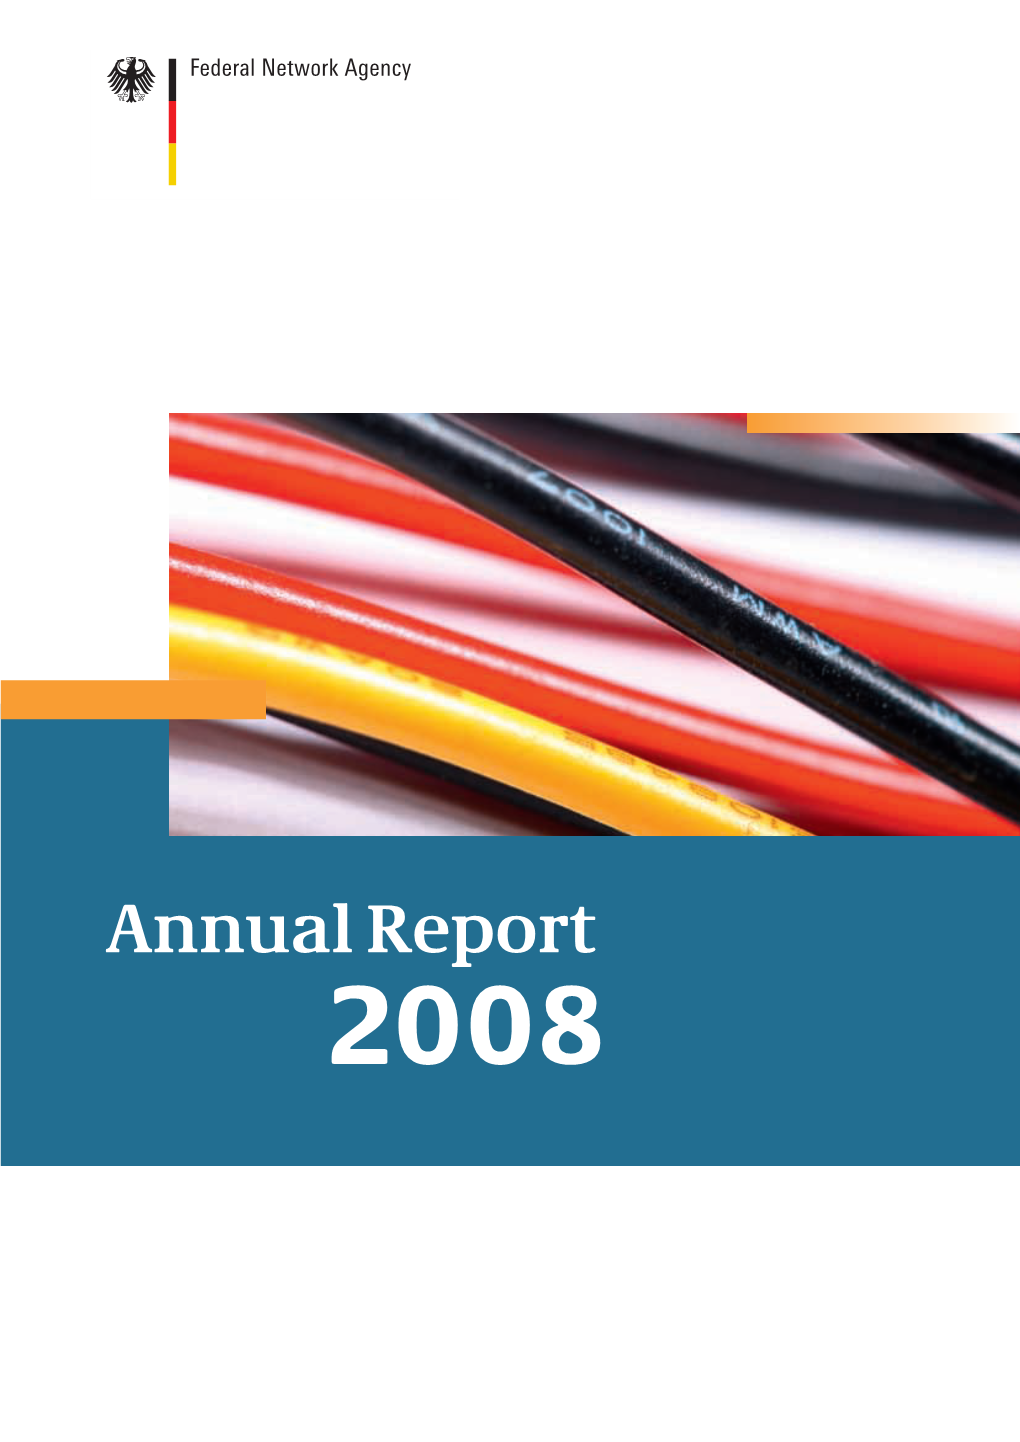 Federal Network Agency for Electricity, Gas, Telecommunications, Post and Railway 2 Federal Network Agency | Annual Report 2008